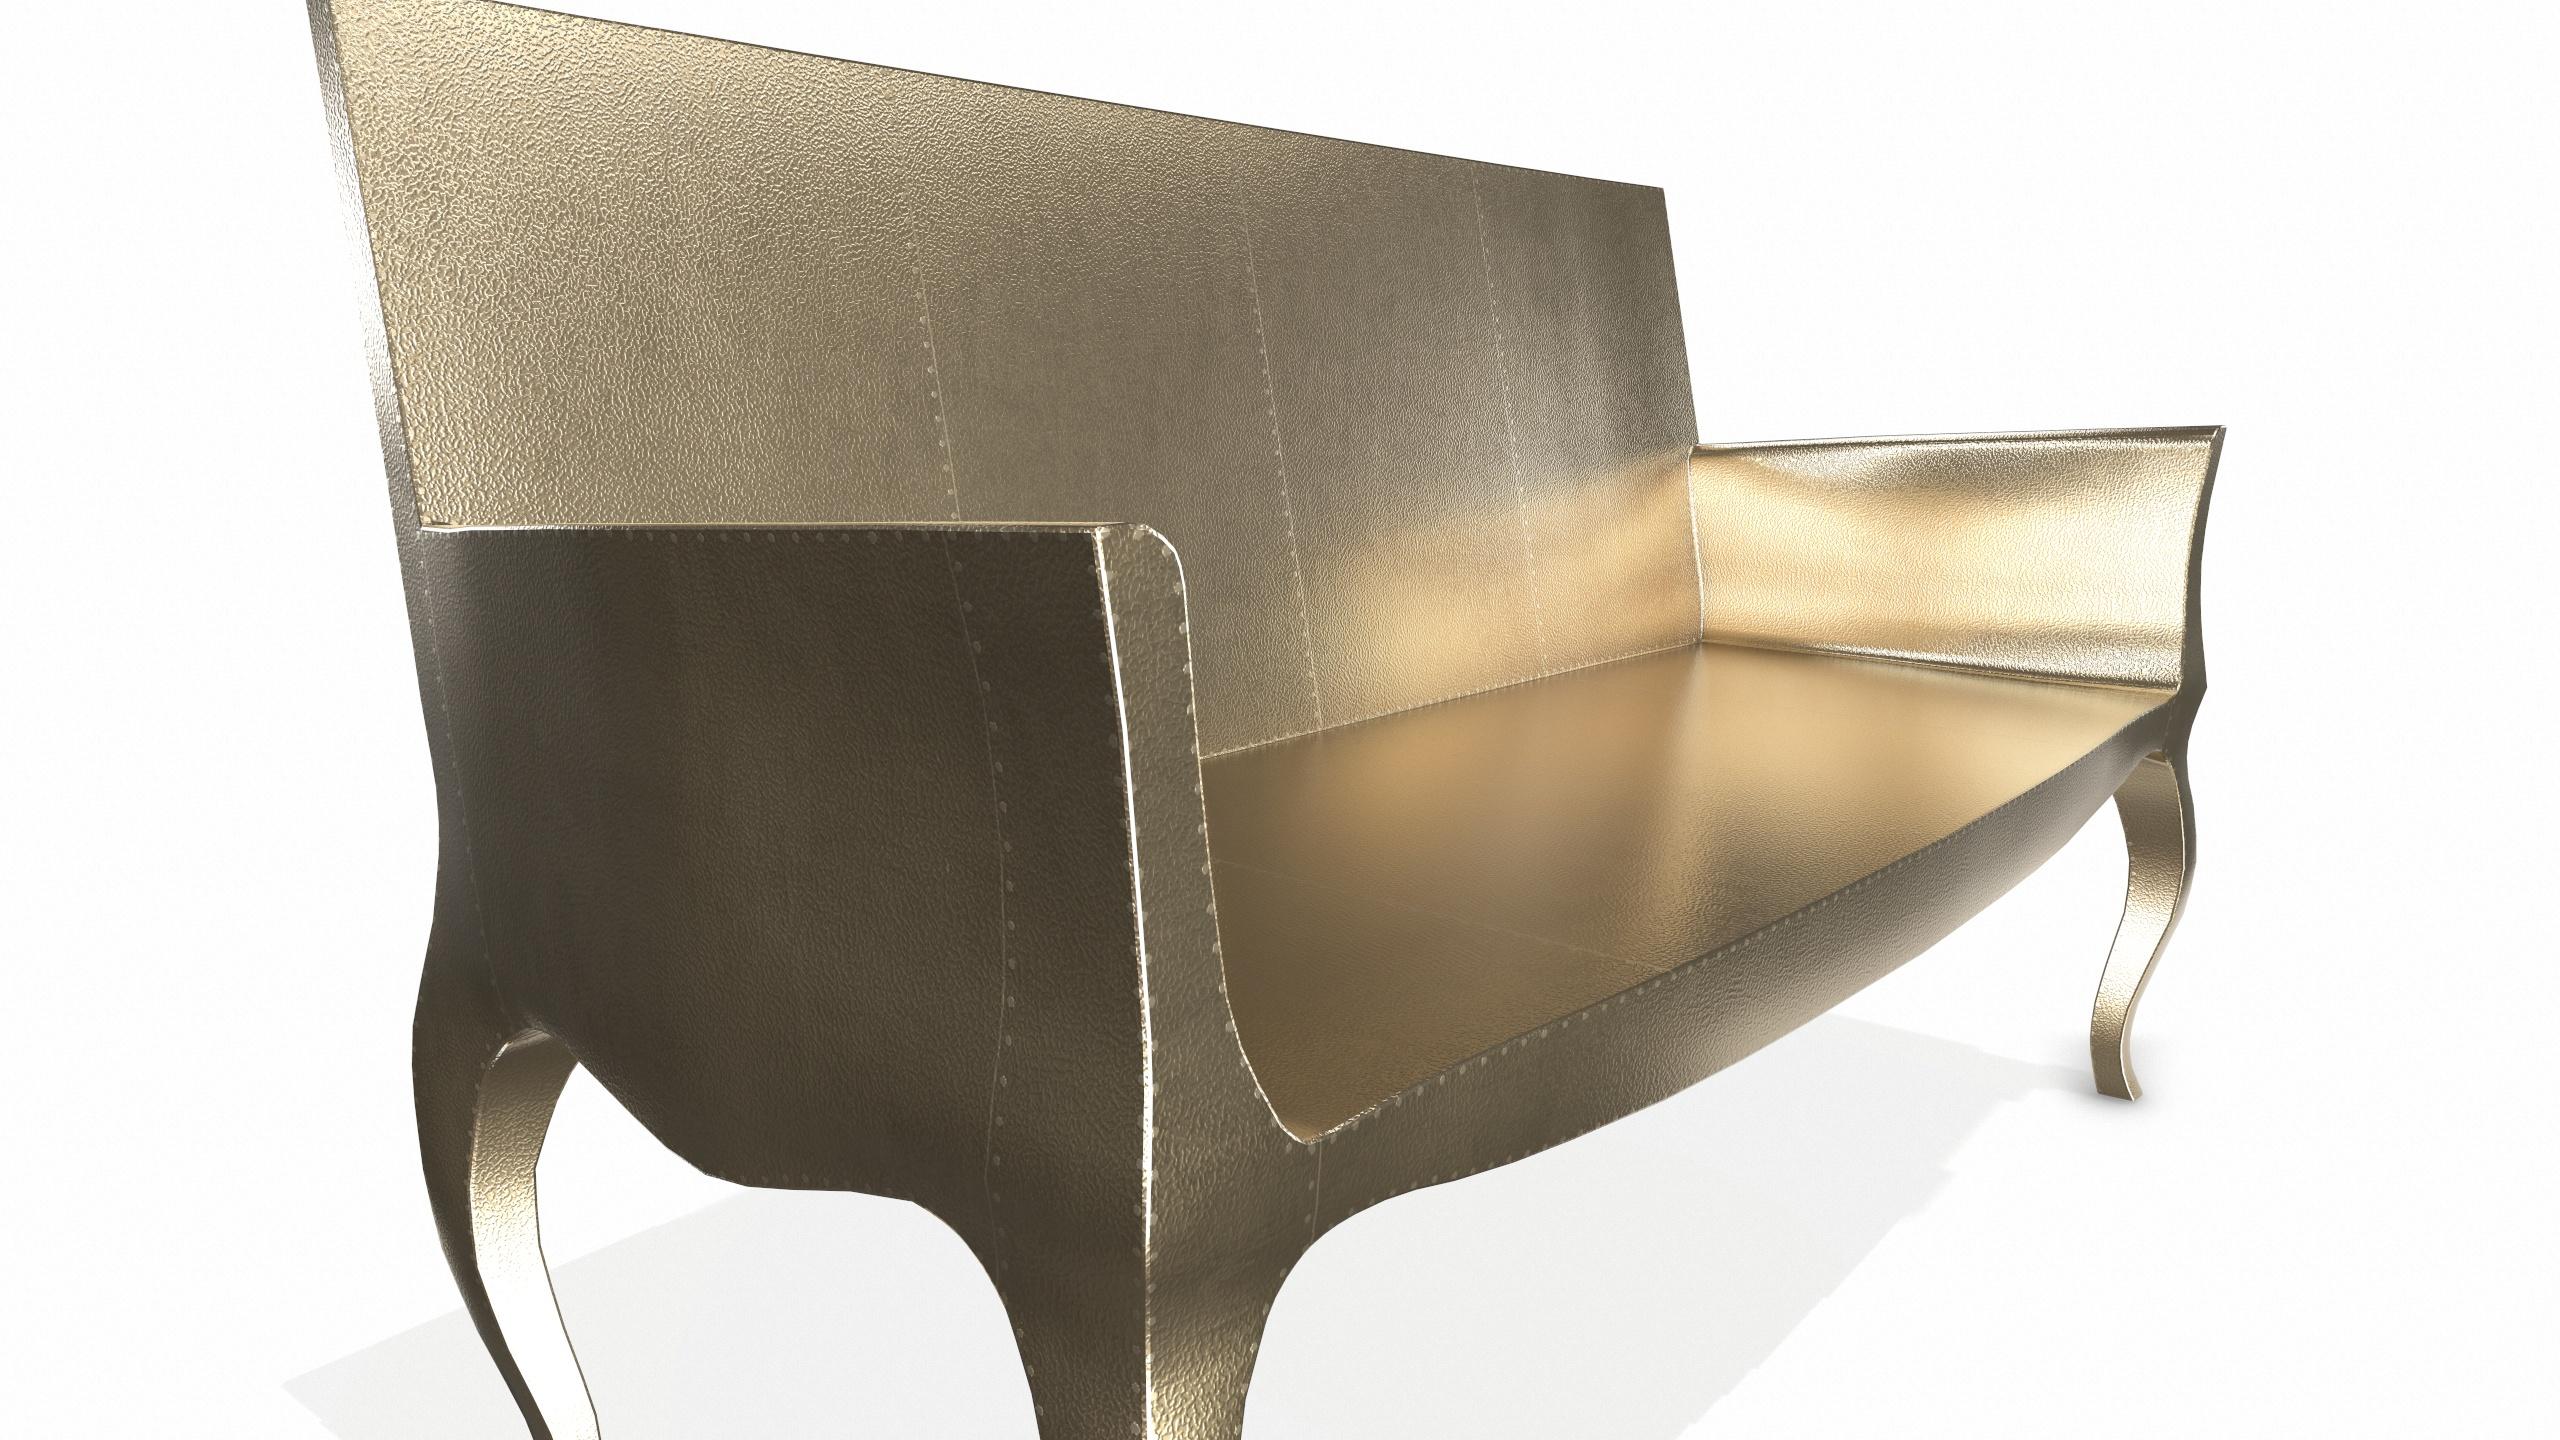 American Louise Settee Art Deco Loveseats in Fine Hammered Brass by Paul Mathieu For Sale